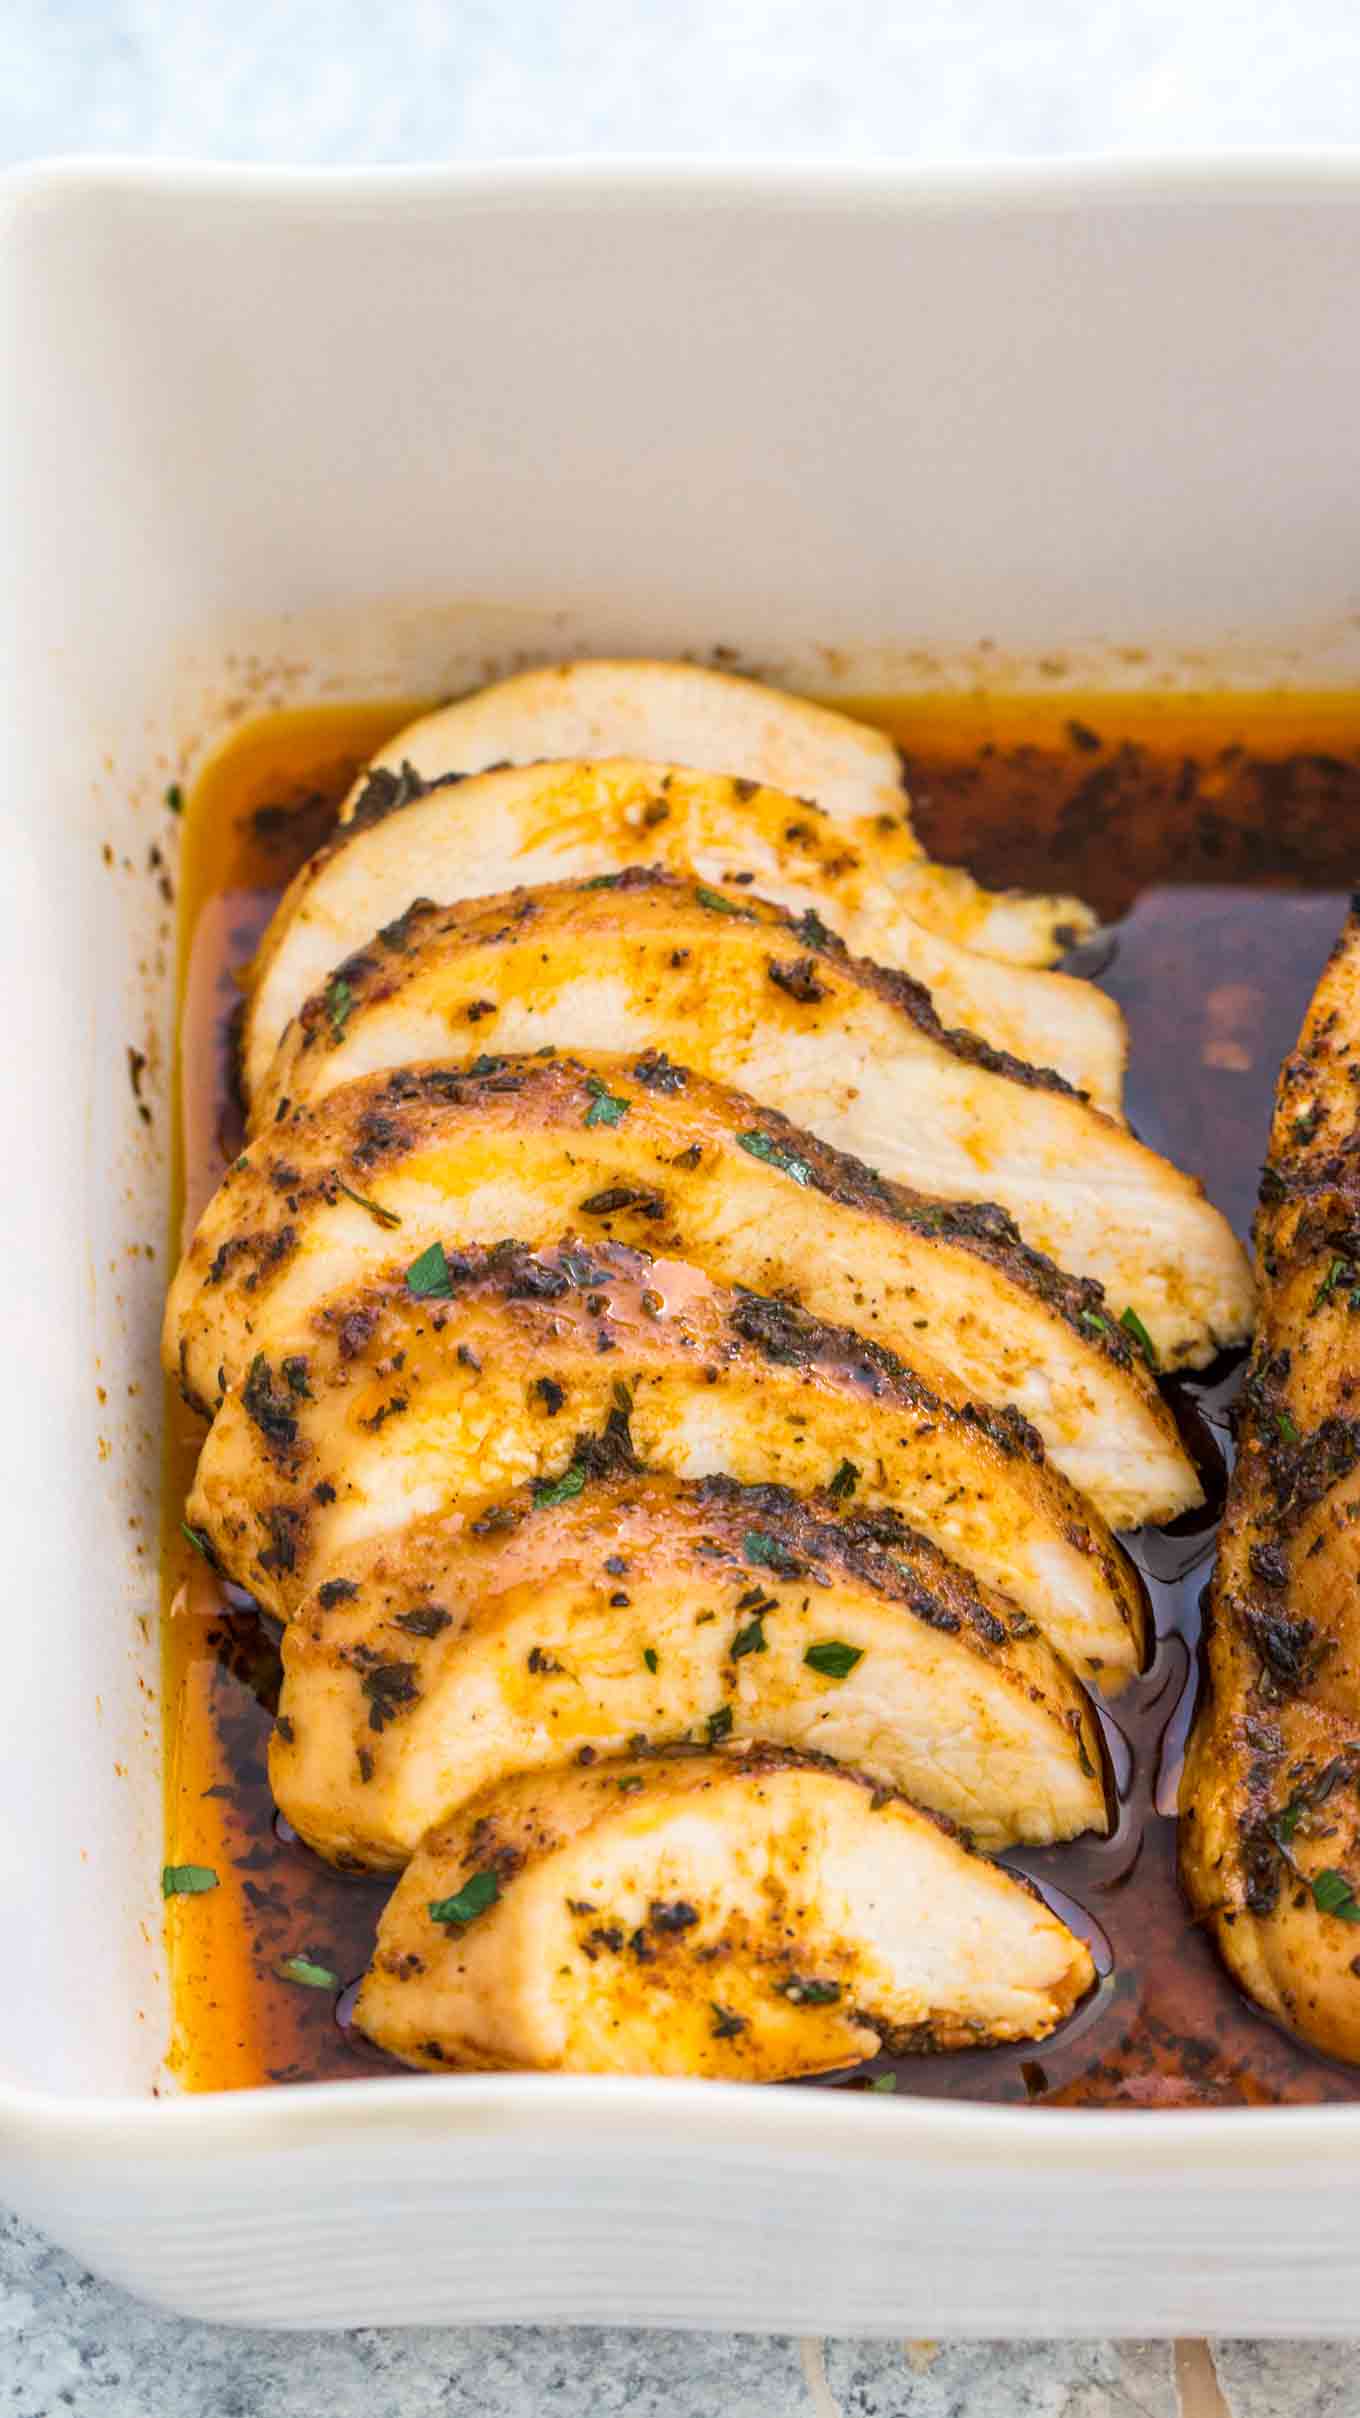 Oven Baked Chicken Breasts Recipe Juicy And Flavorful [video] Sandsm